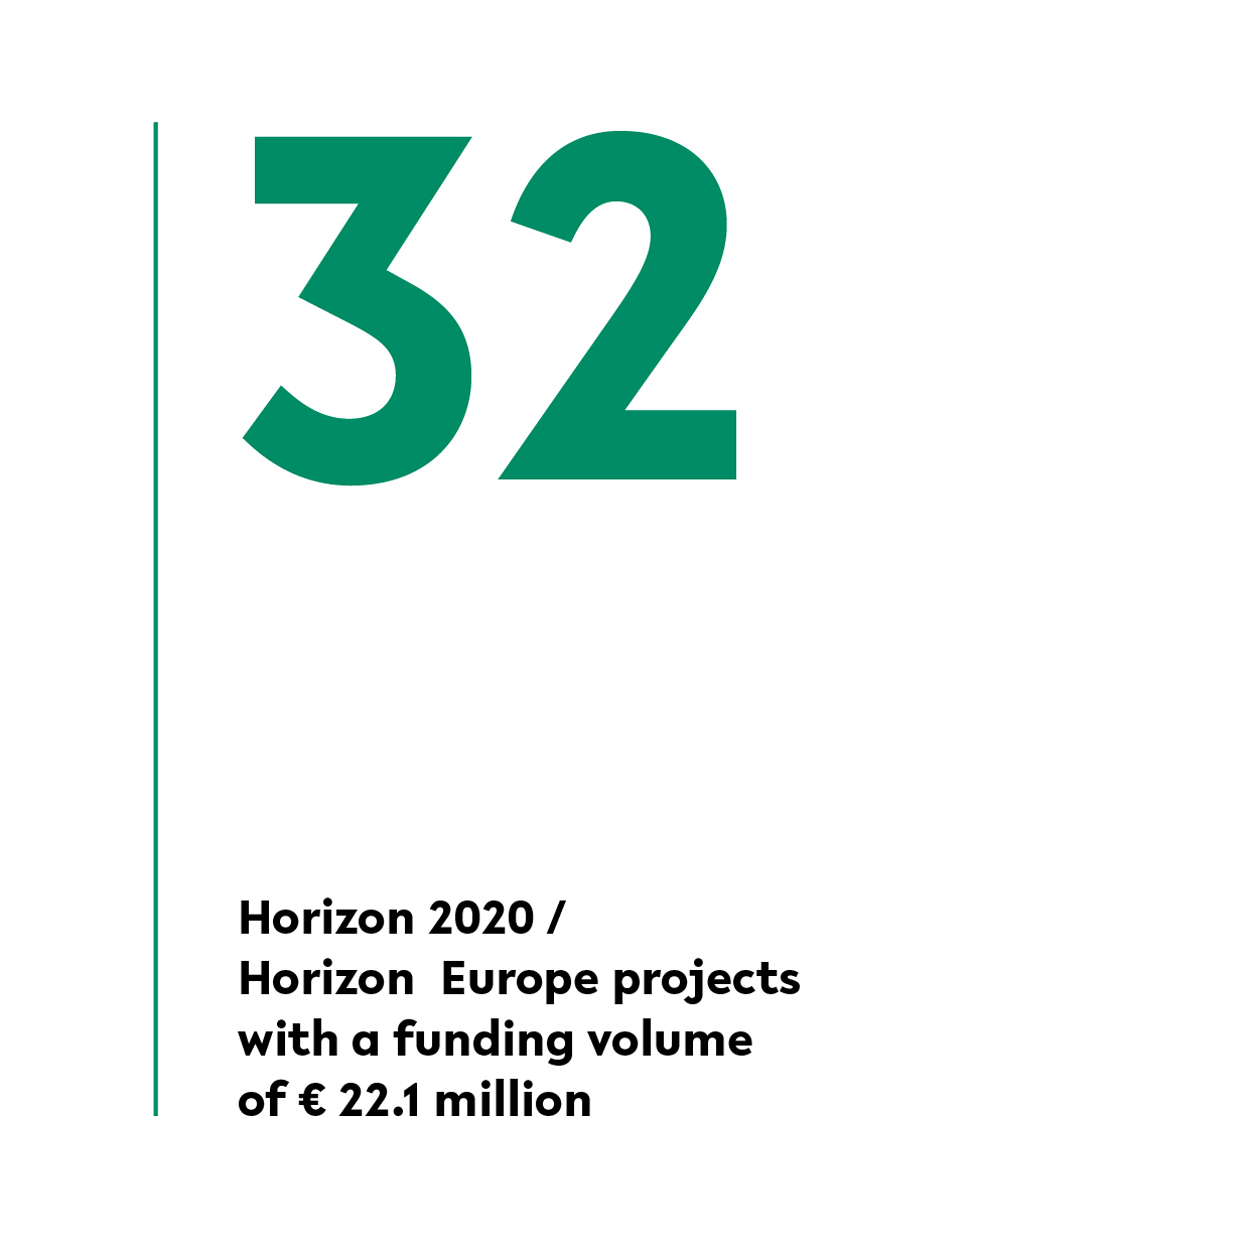 At Bielefeld University there are 31 Horizon 2020 or Horizon Europe projects with a funding volume of 21.7 million euros. 